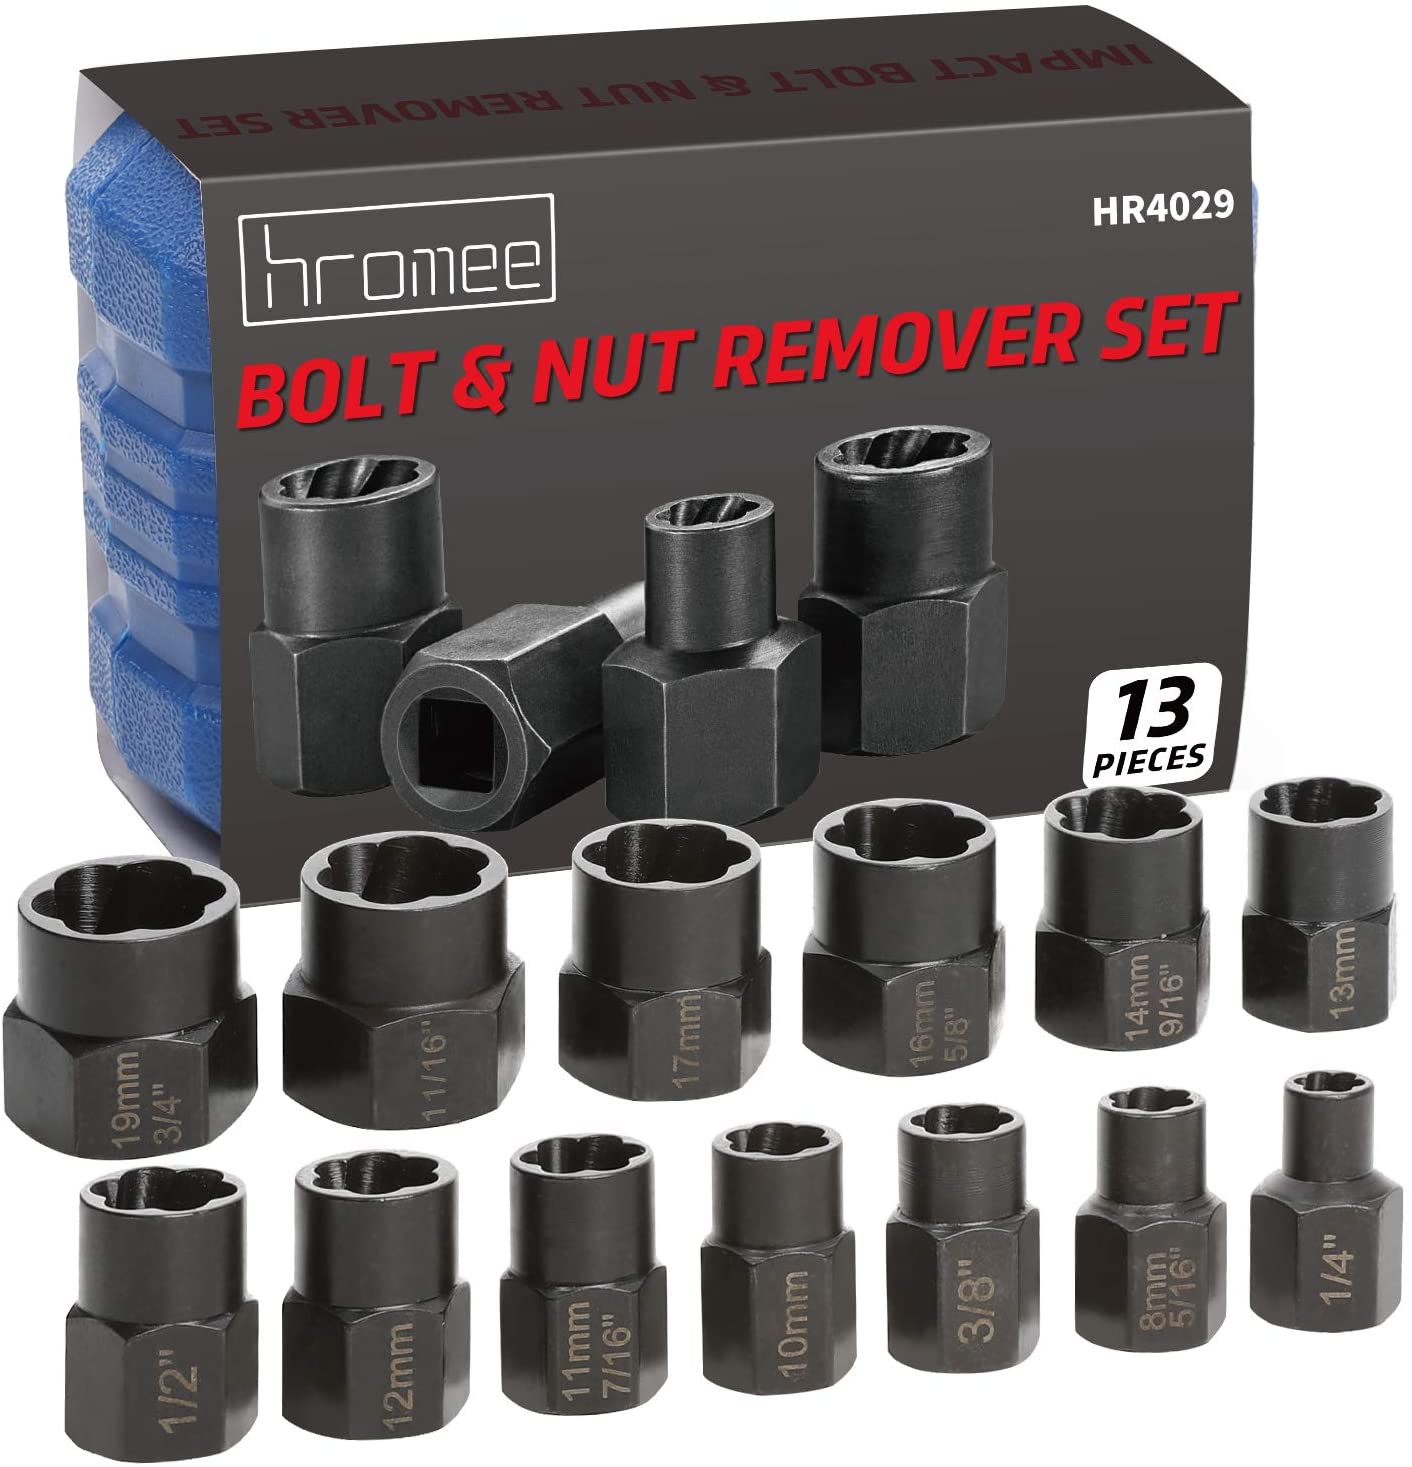 Hromee Impact Damaged Metric SAE Bolt And Nut Removal, 13-Piece